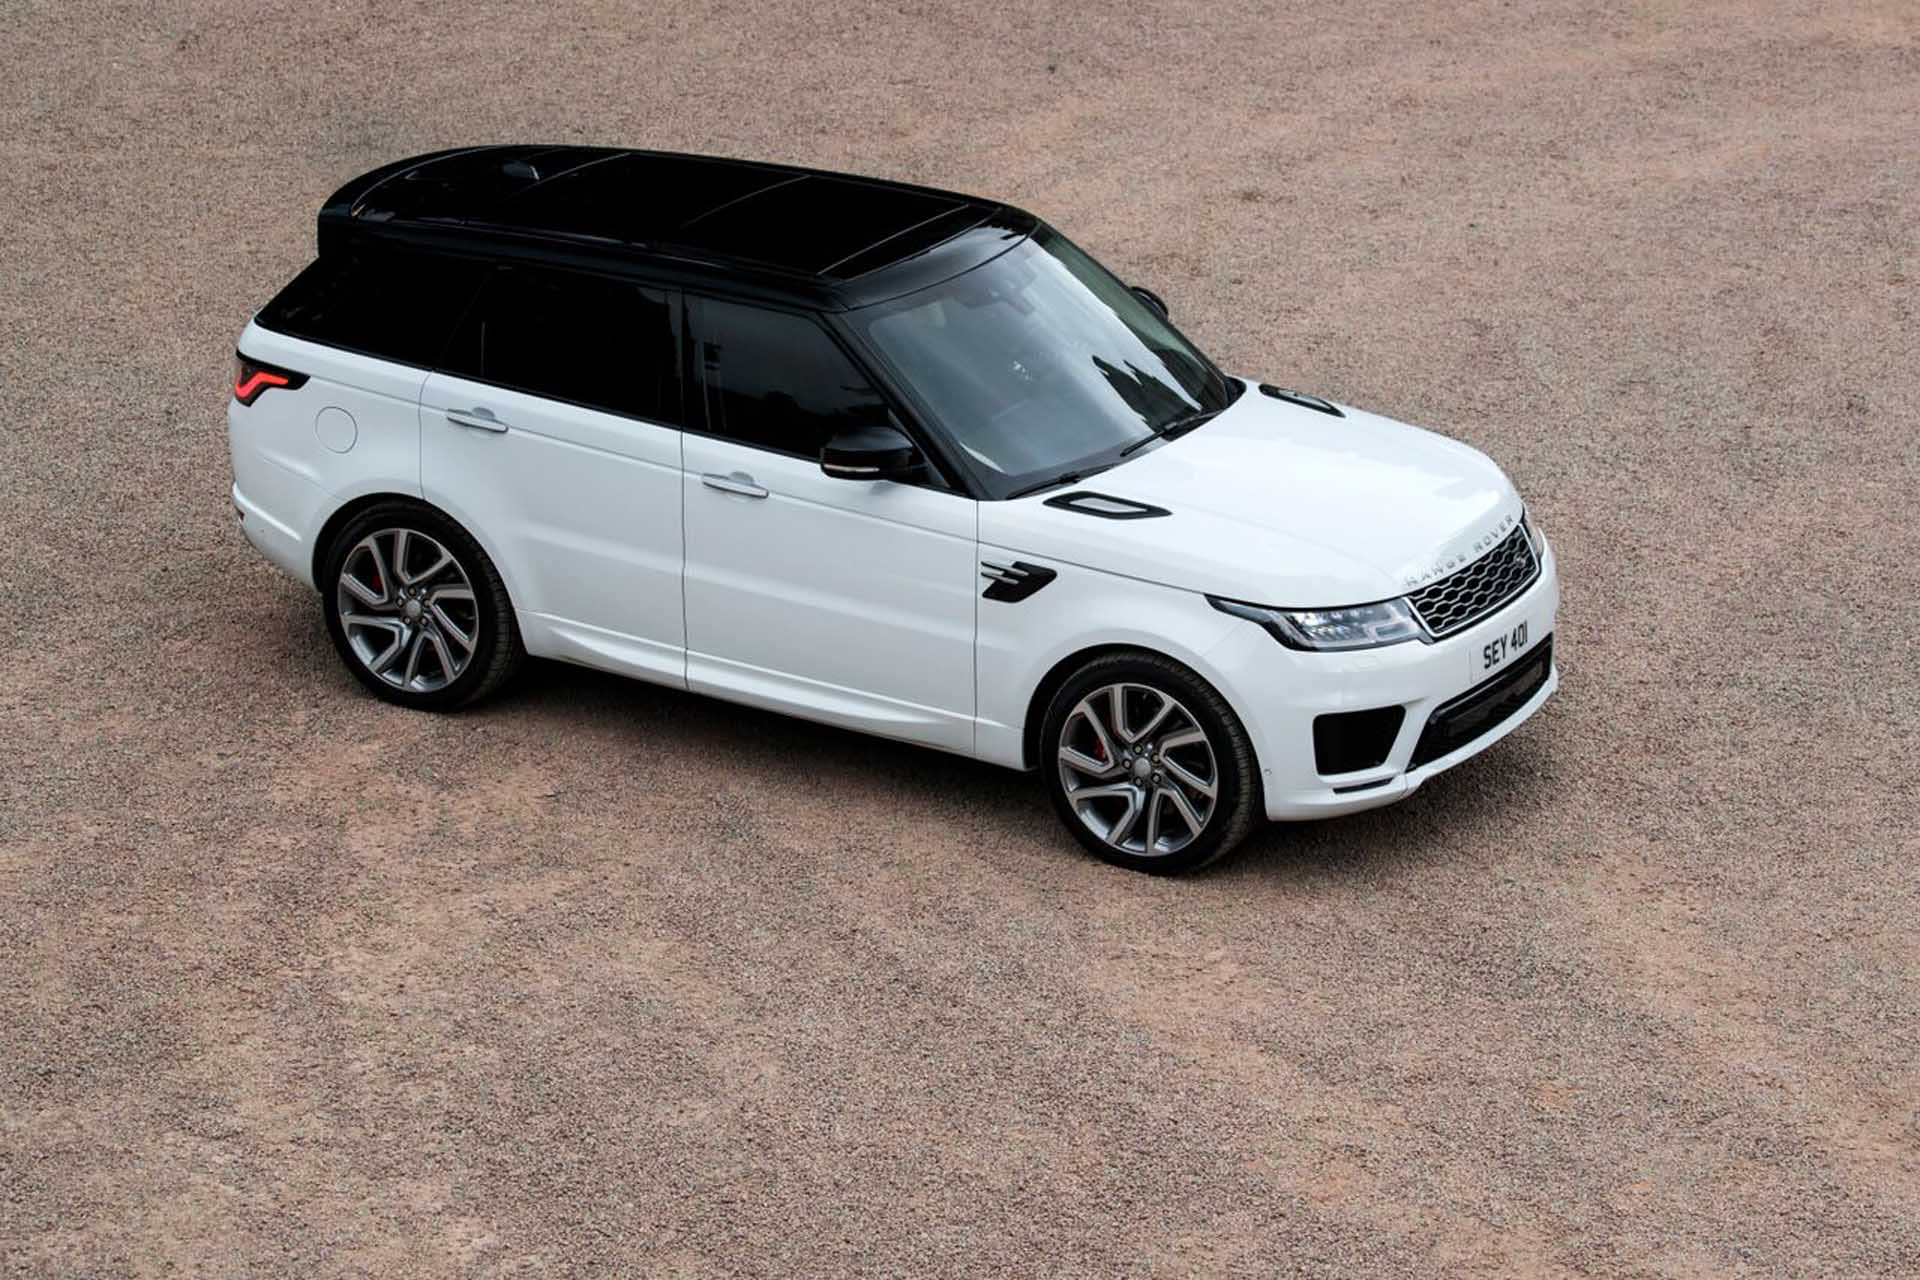 Range Rover Hybrid Battery Replacement  : The Battery Will Deliver A Range Of Up To 68Km* Plus The Additional Range Of The Petrol Fuel Tank.